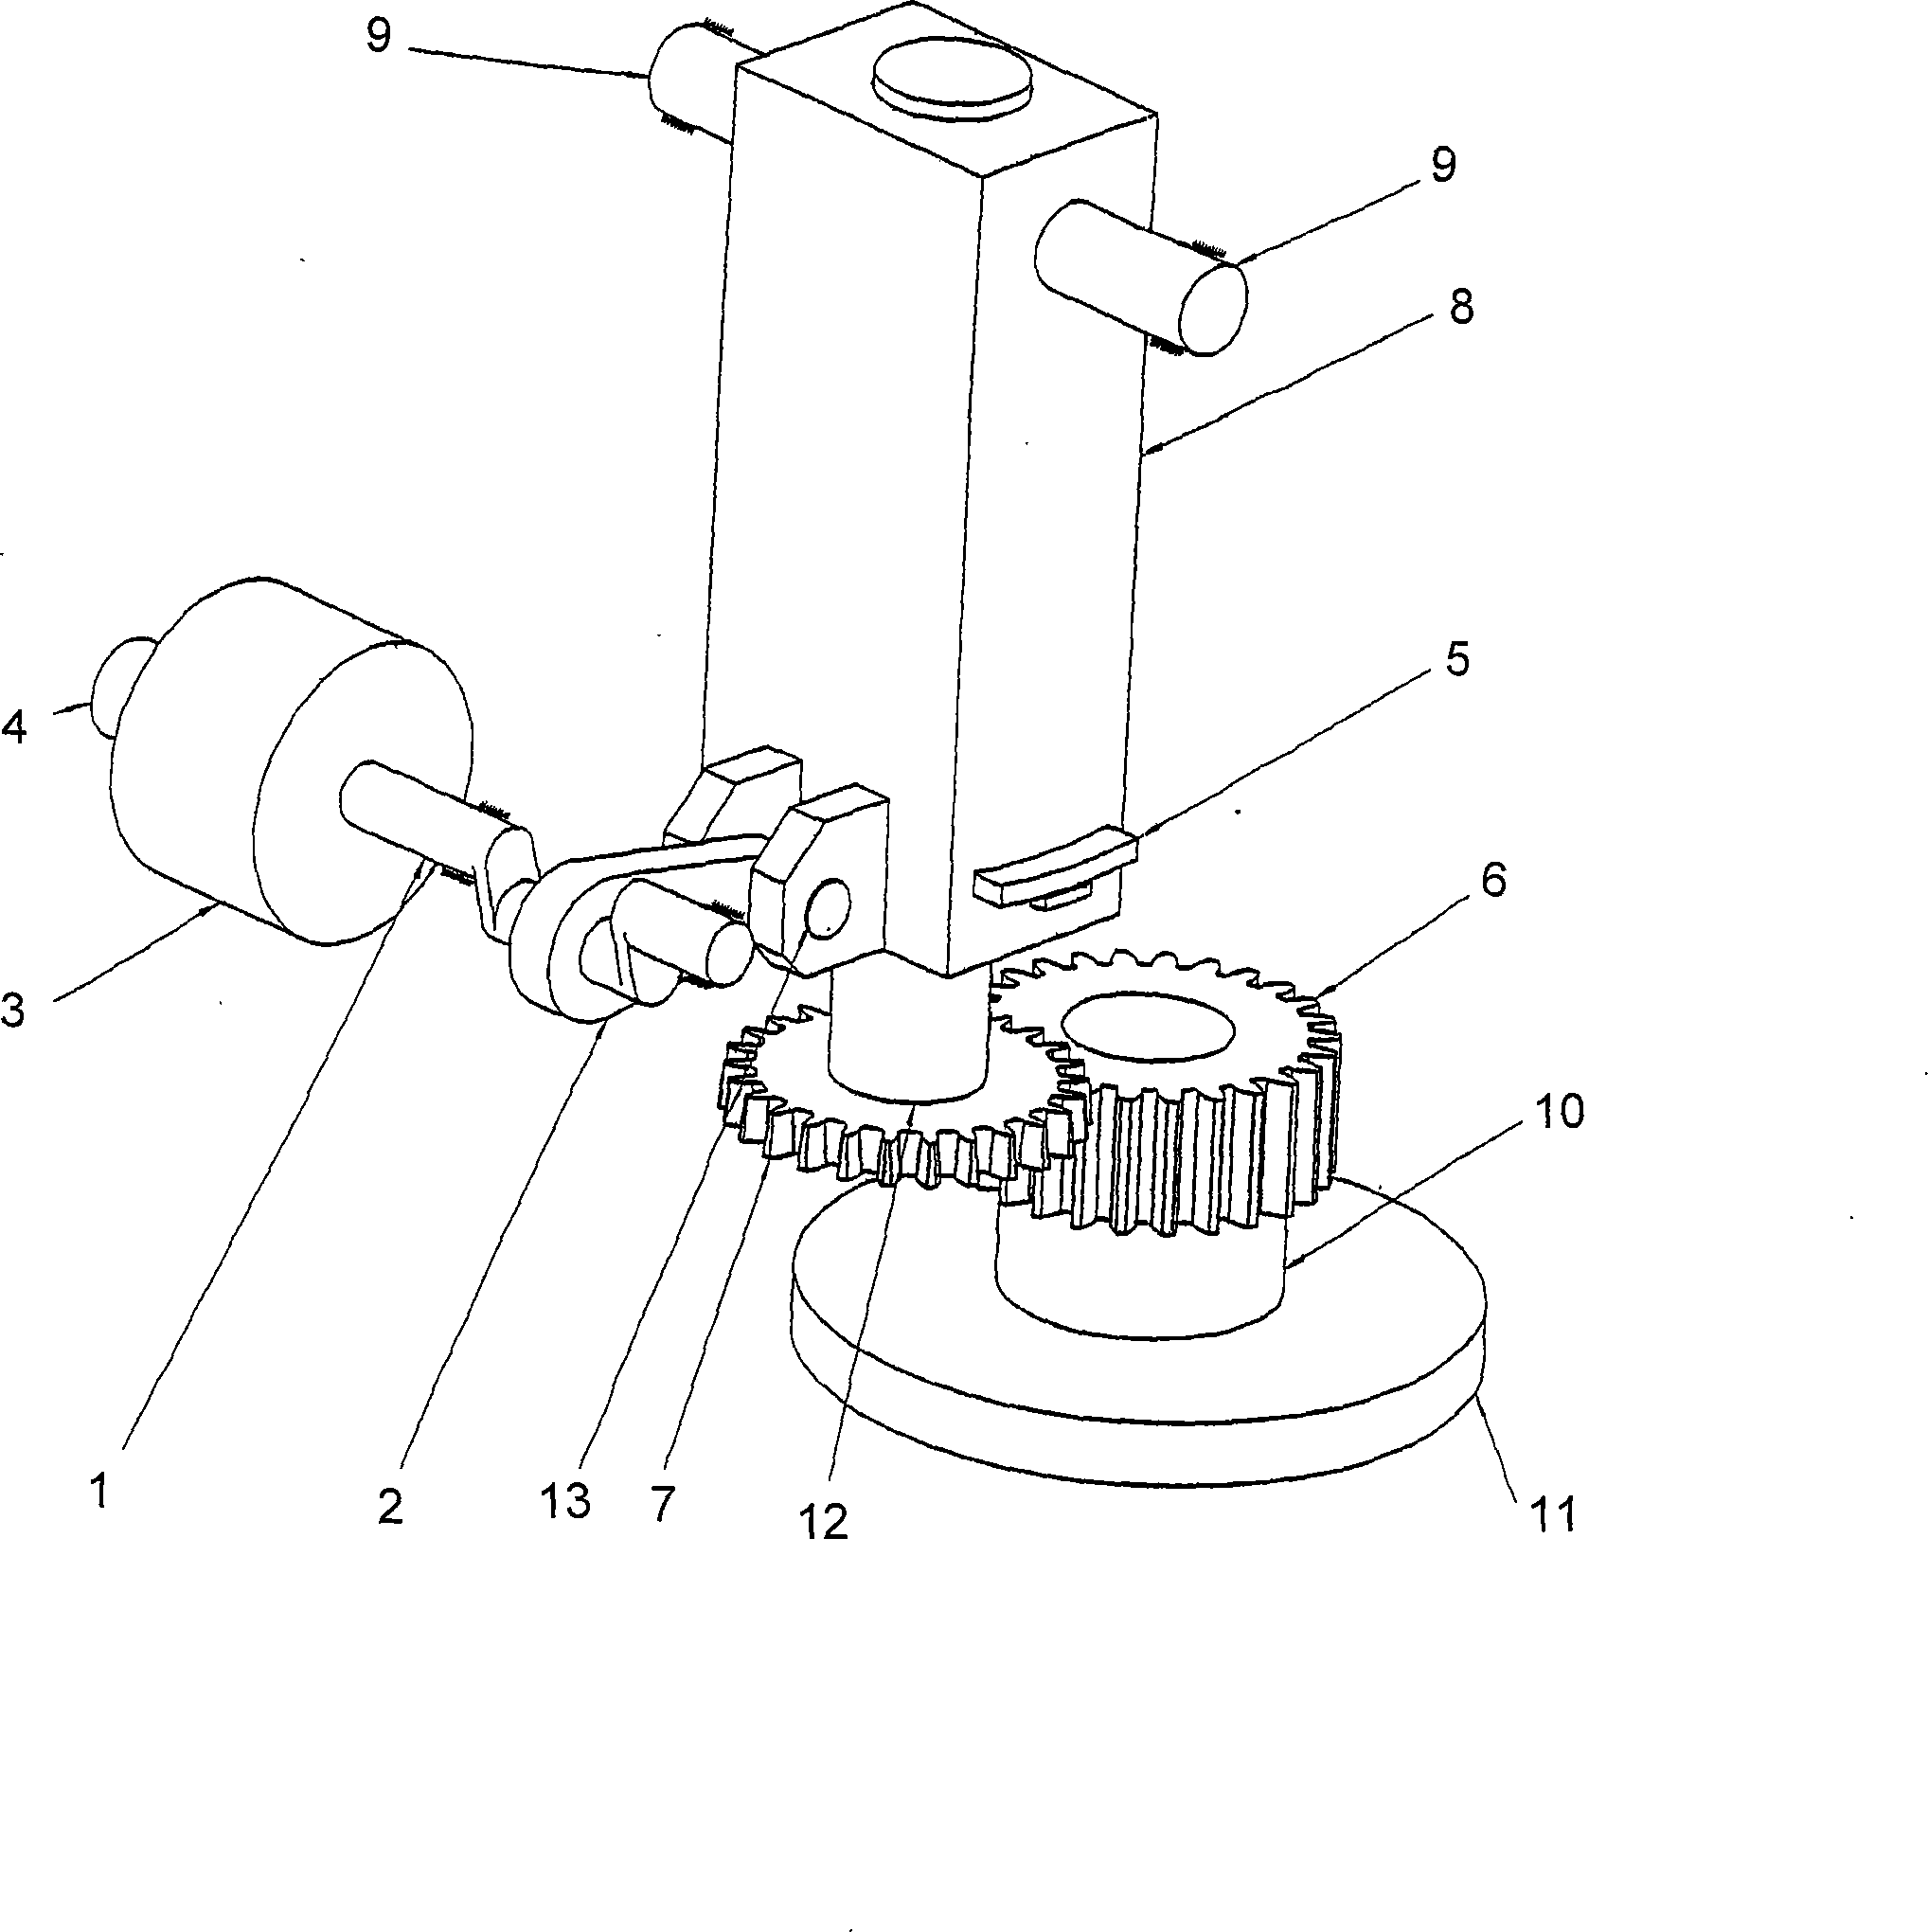 Gear shaping machine and method for manufacturing or processing gear wheel